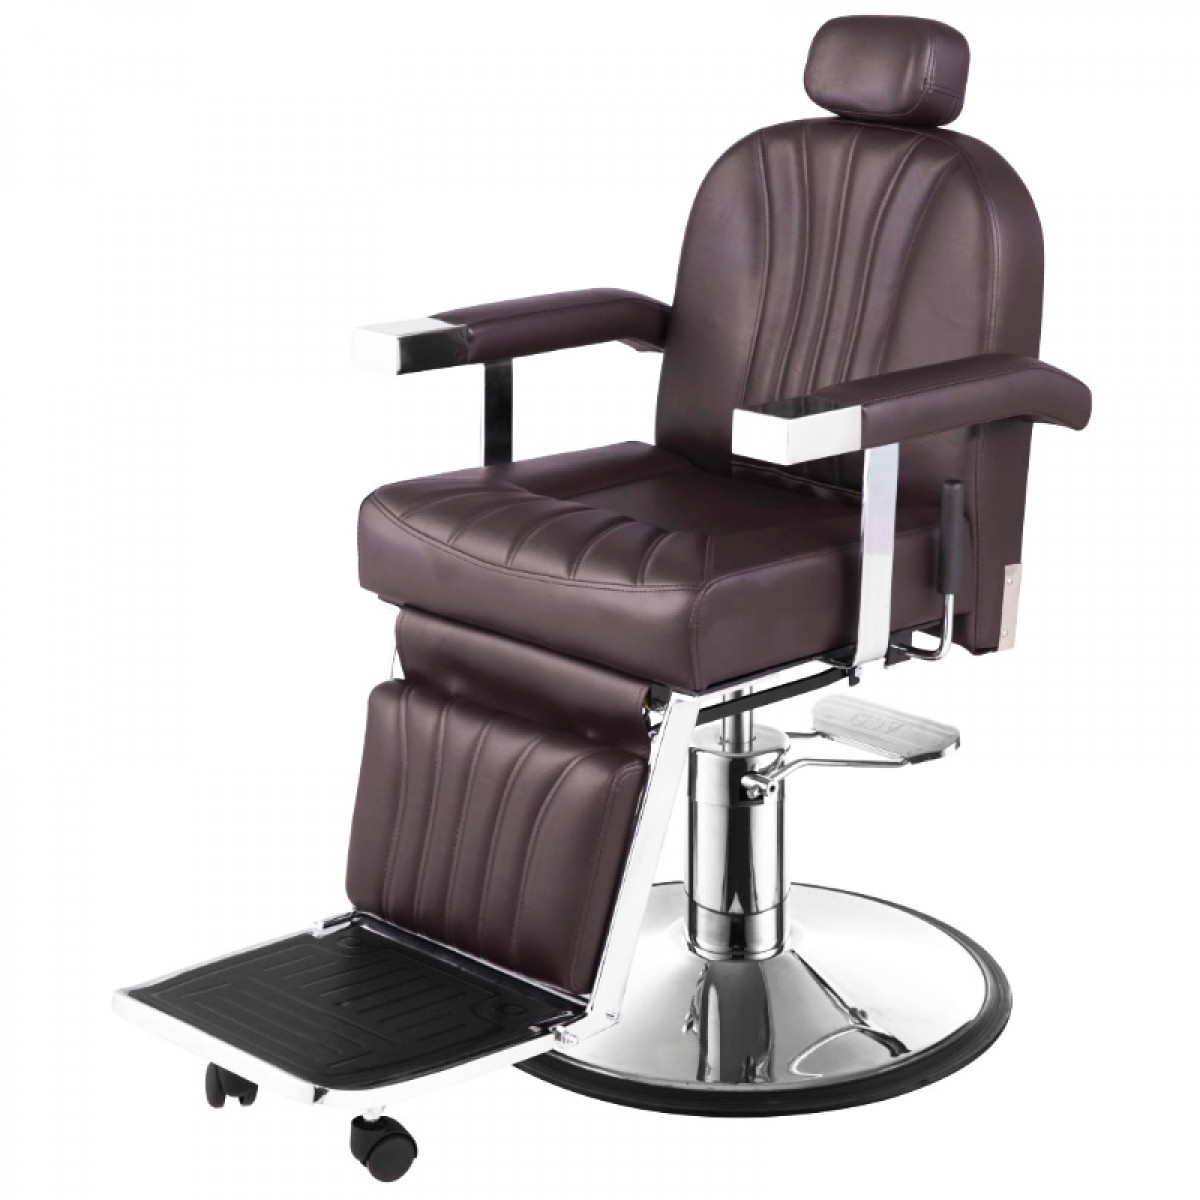 "CICERO" Barber Chair in Soft Chocolate 